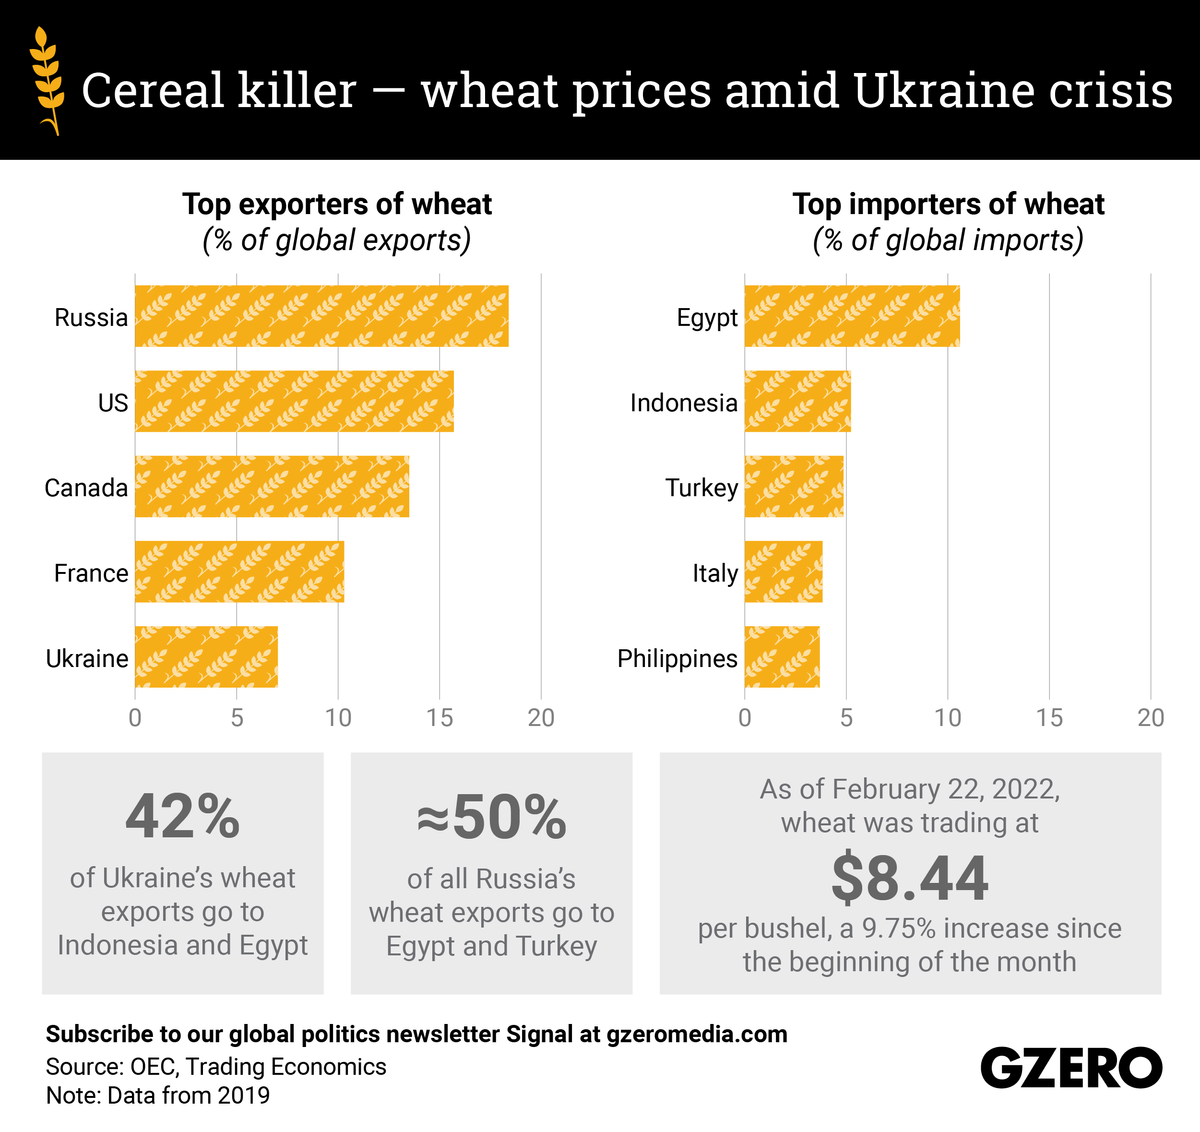 The Graphic Truth: Cereal killer — wheat prices amid Ukraine crisis